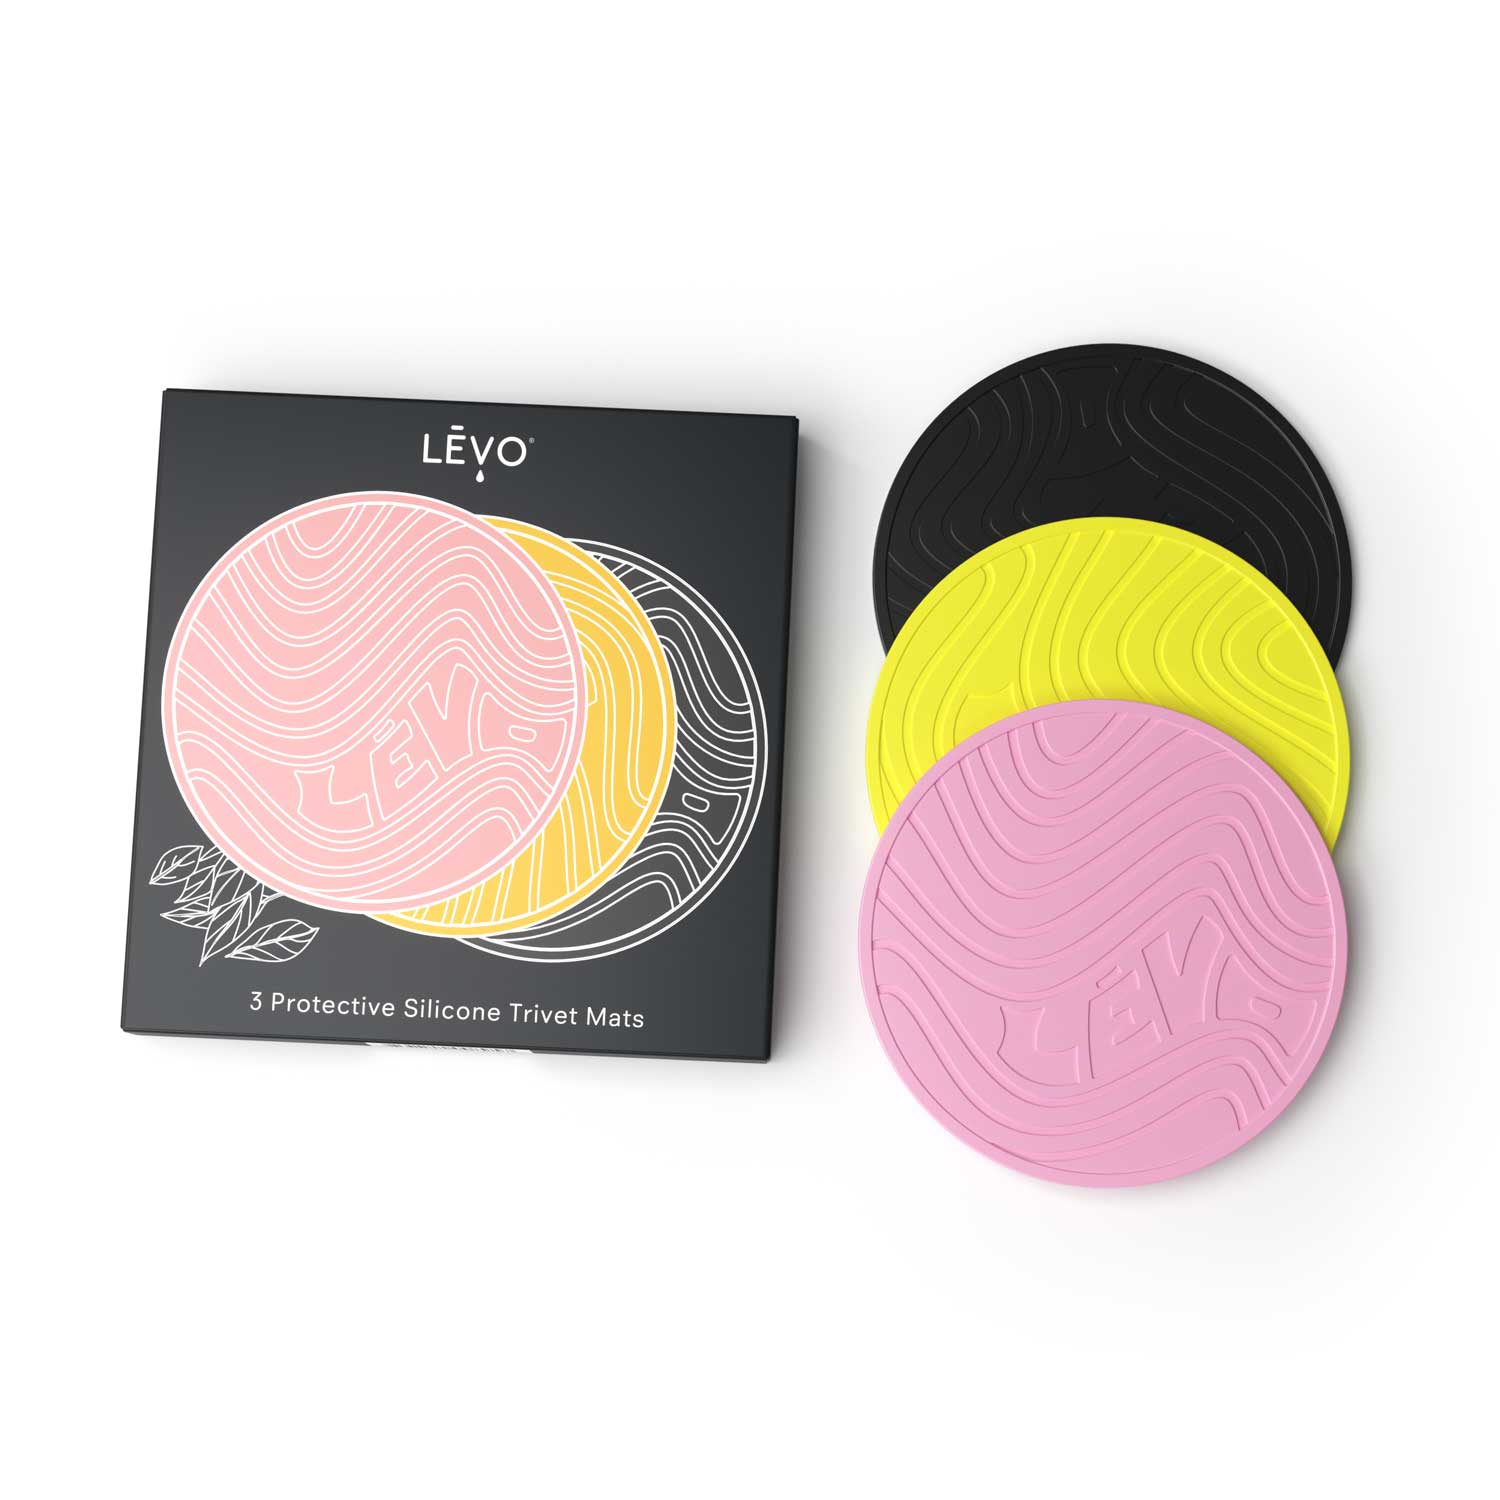 LĒVO Silicone Trivets in yellow, pink, and black with packaging